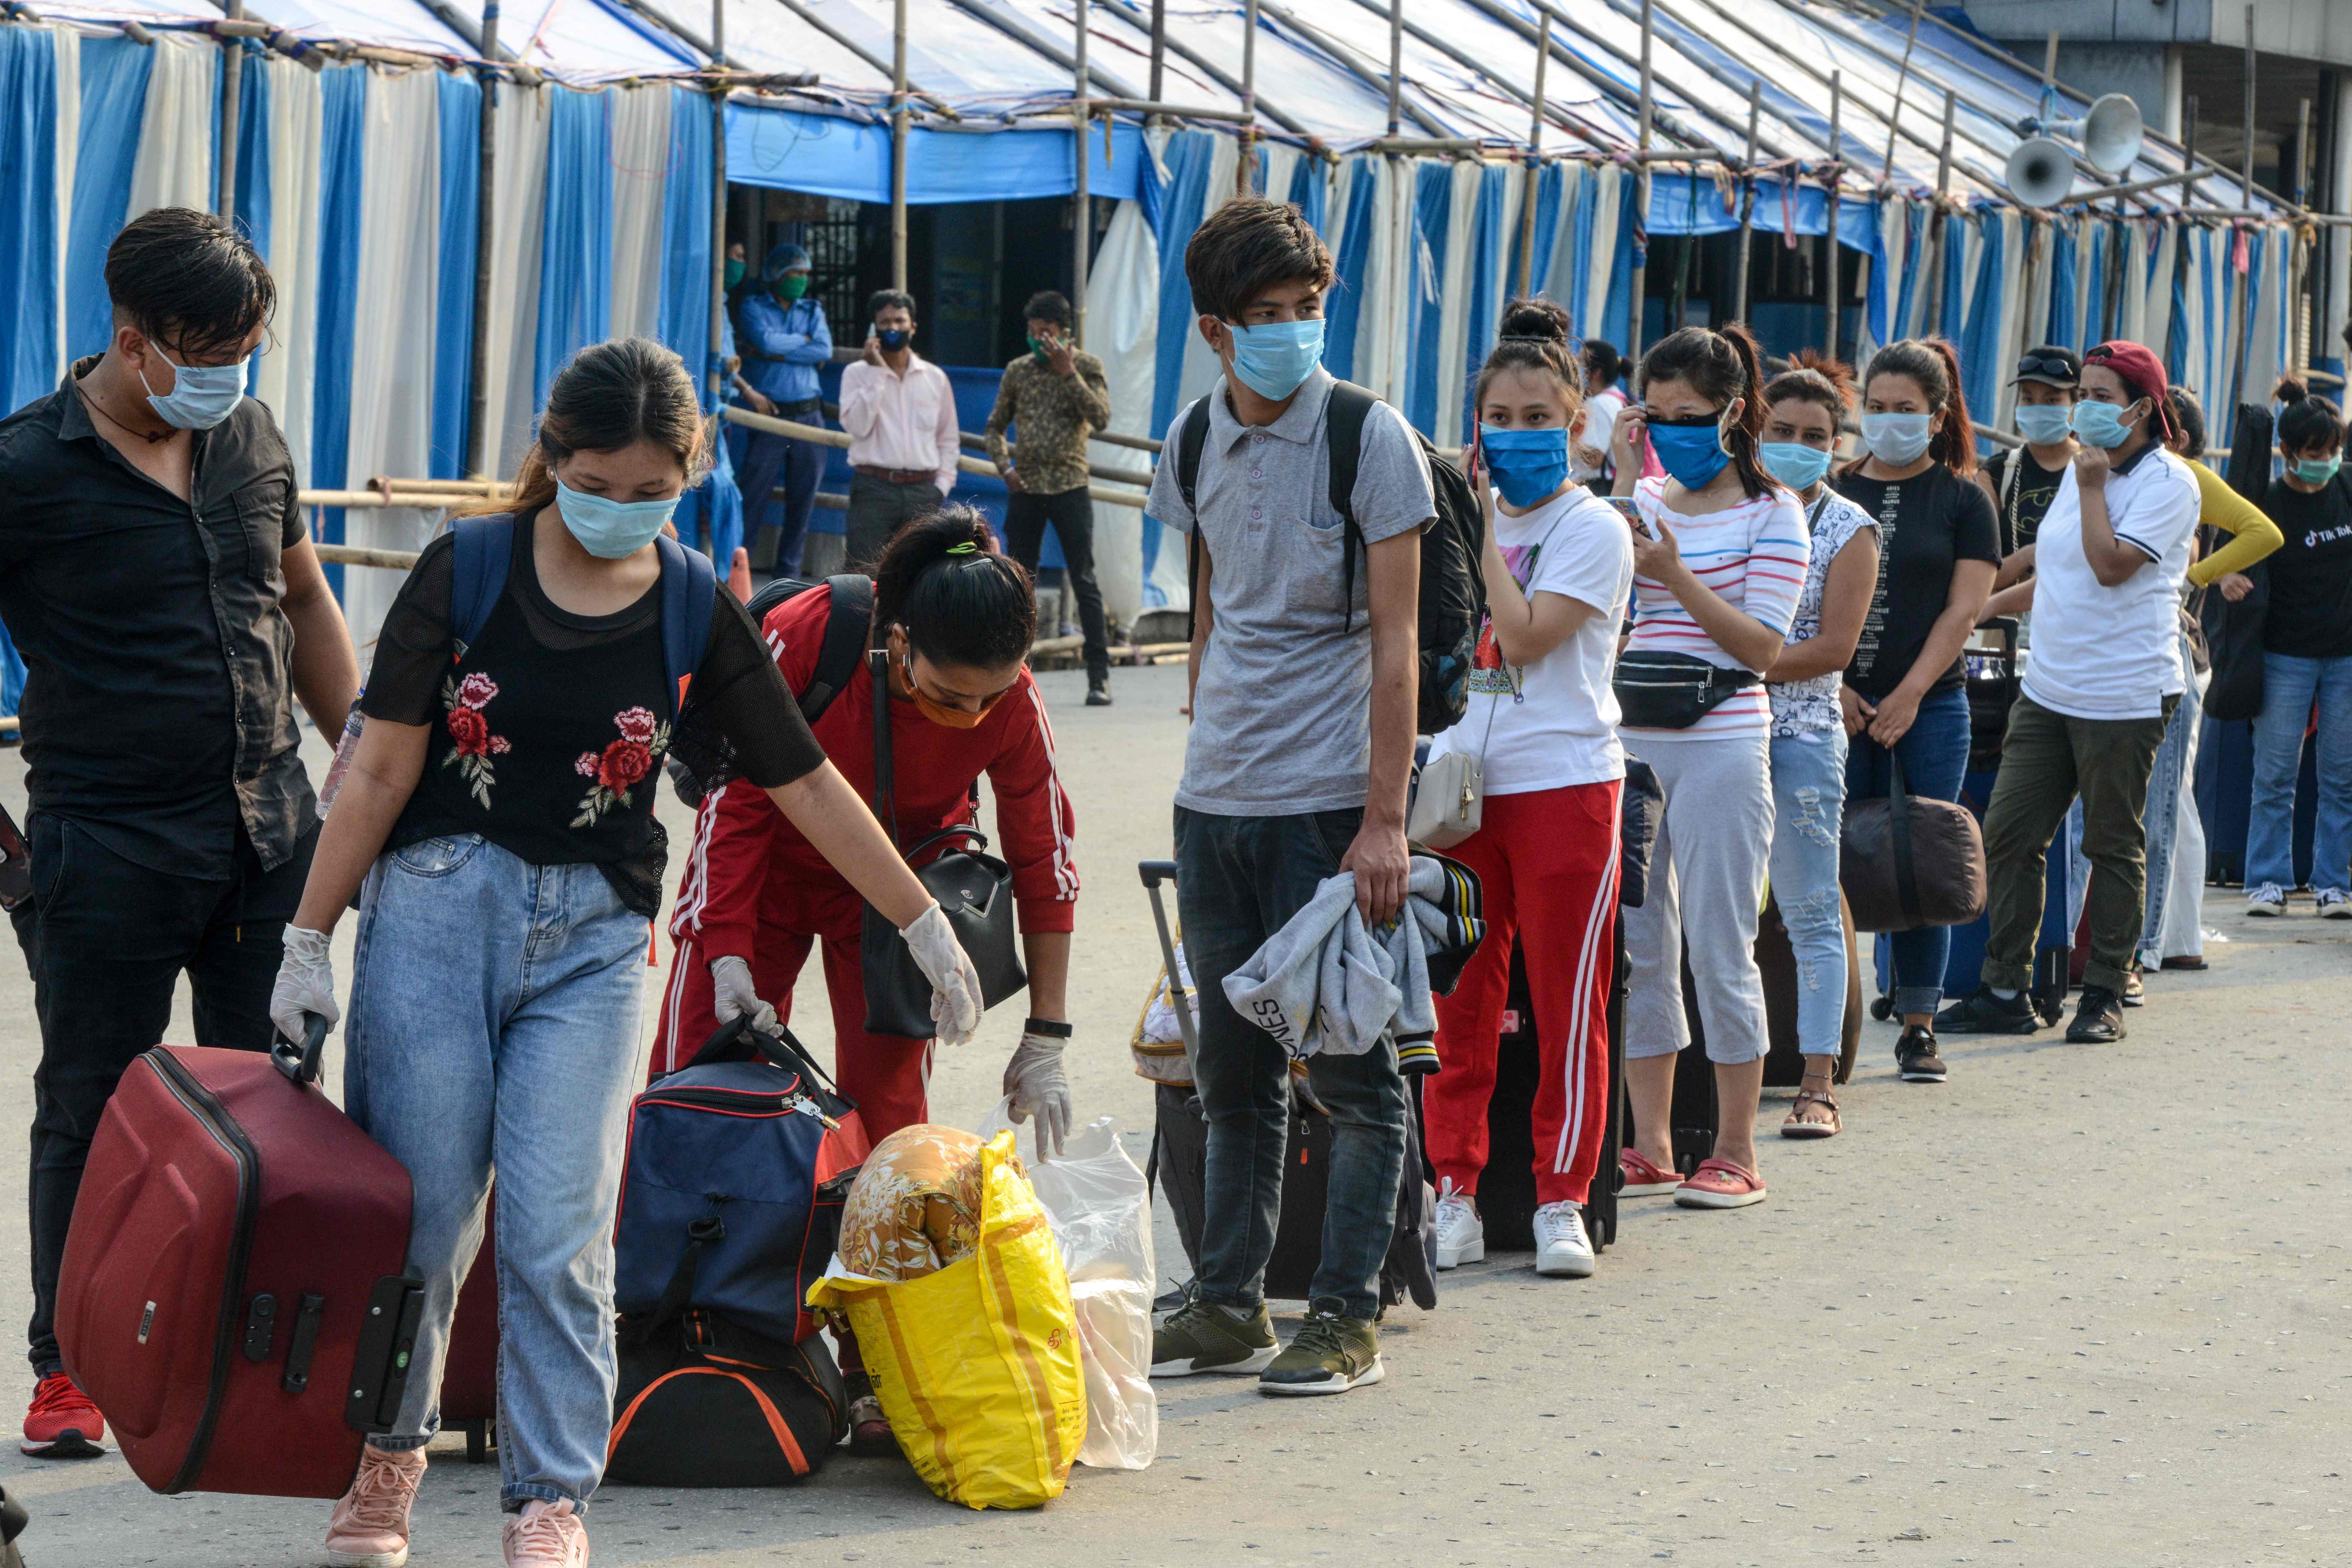 Migrant passengers from Sikkim state wait for transportation after they arrived from Chennai. (AFP Photo)